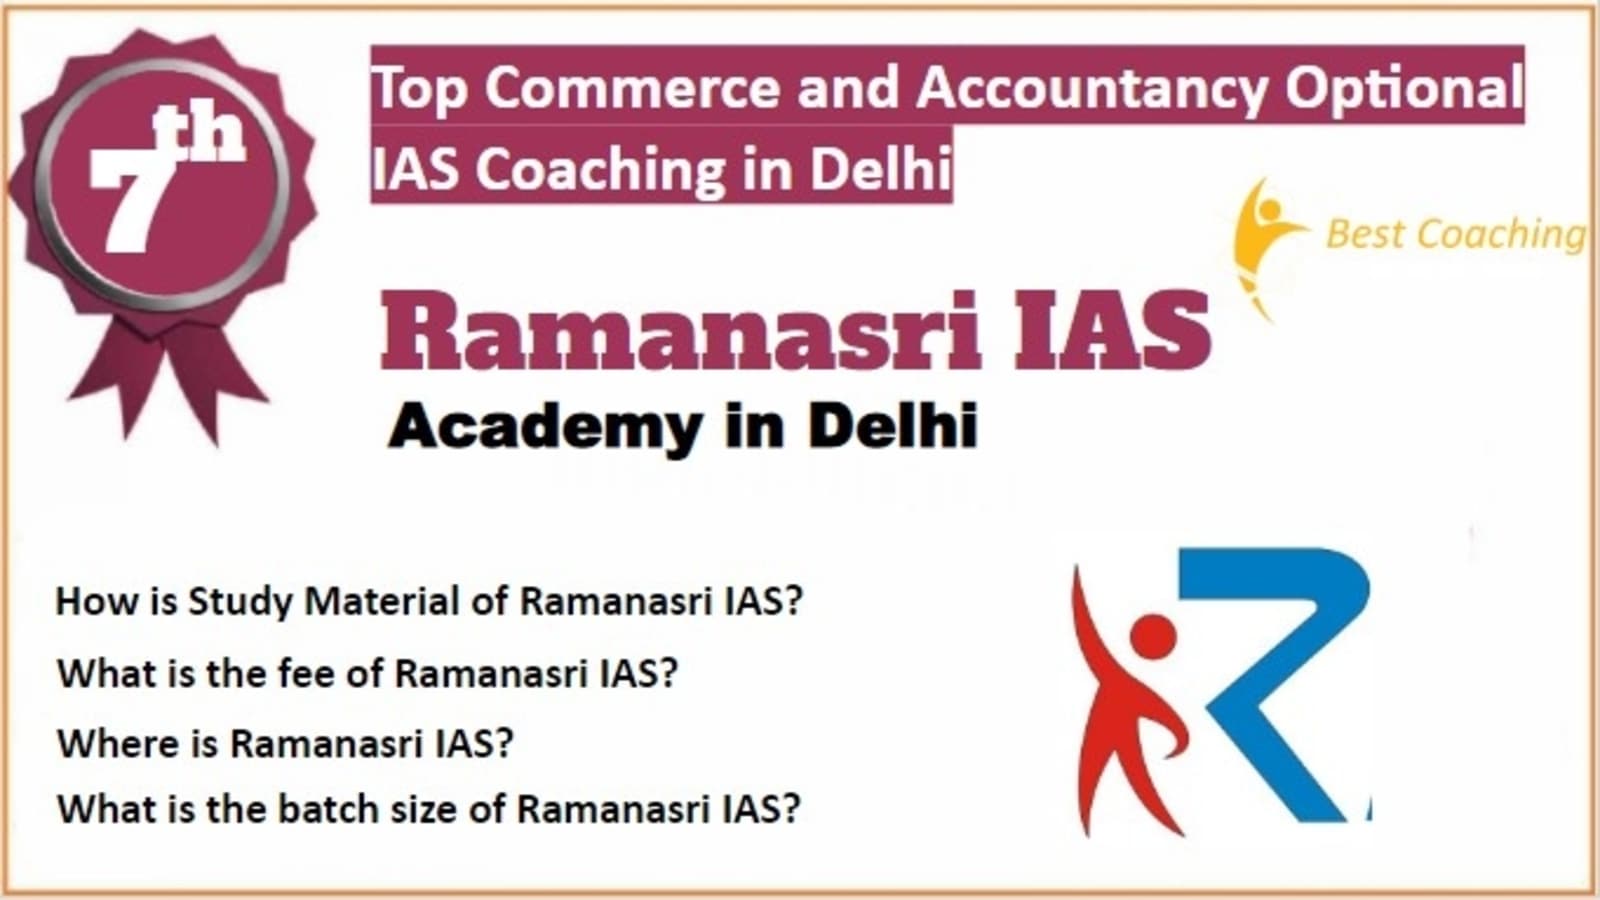 Rank 7 Best Commerce and Accountancy Optional IAS Coaching in Delhi